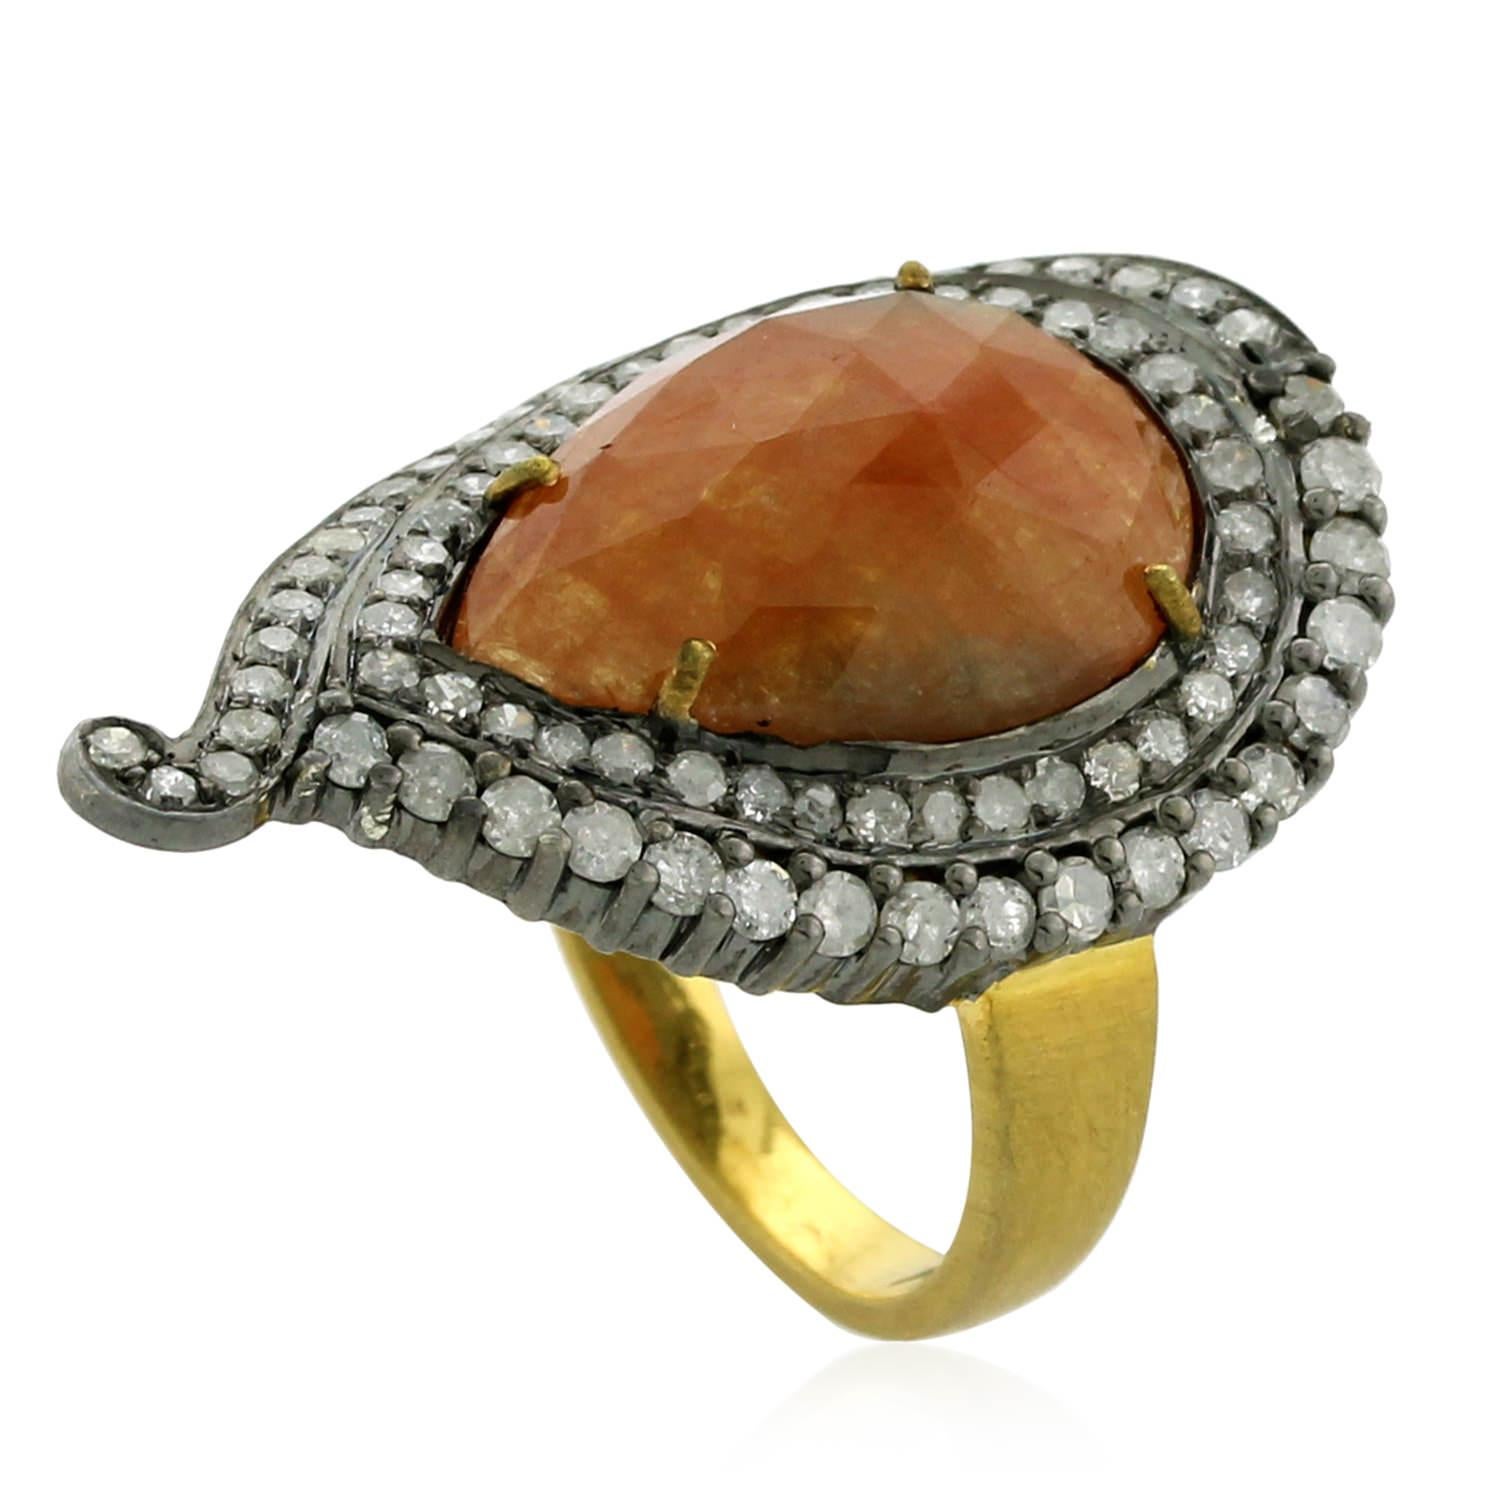 This paisley shape Sliced Orange Sapphire and Diamond Ring in silver and 18K Gold is charming.


18kt gold:2.53 gms
Diamond: 1cts
Silver: 2.2gms 
Sapphire: 6.8cts
